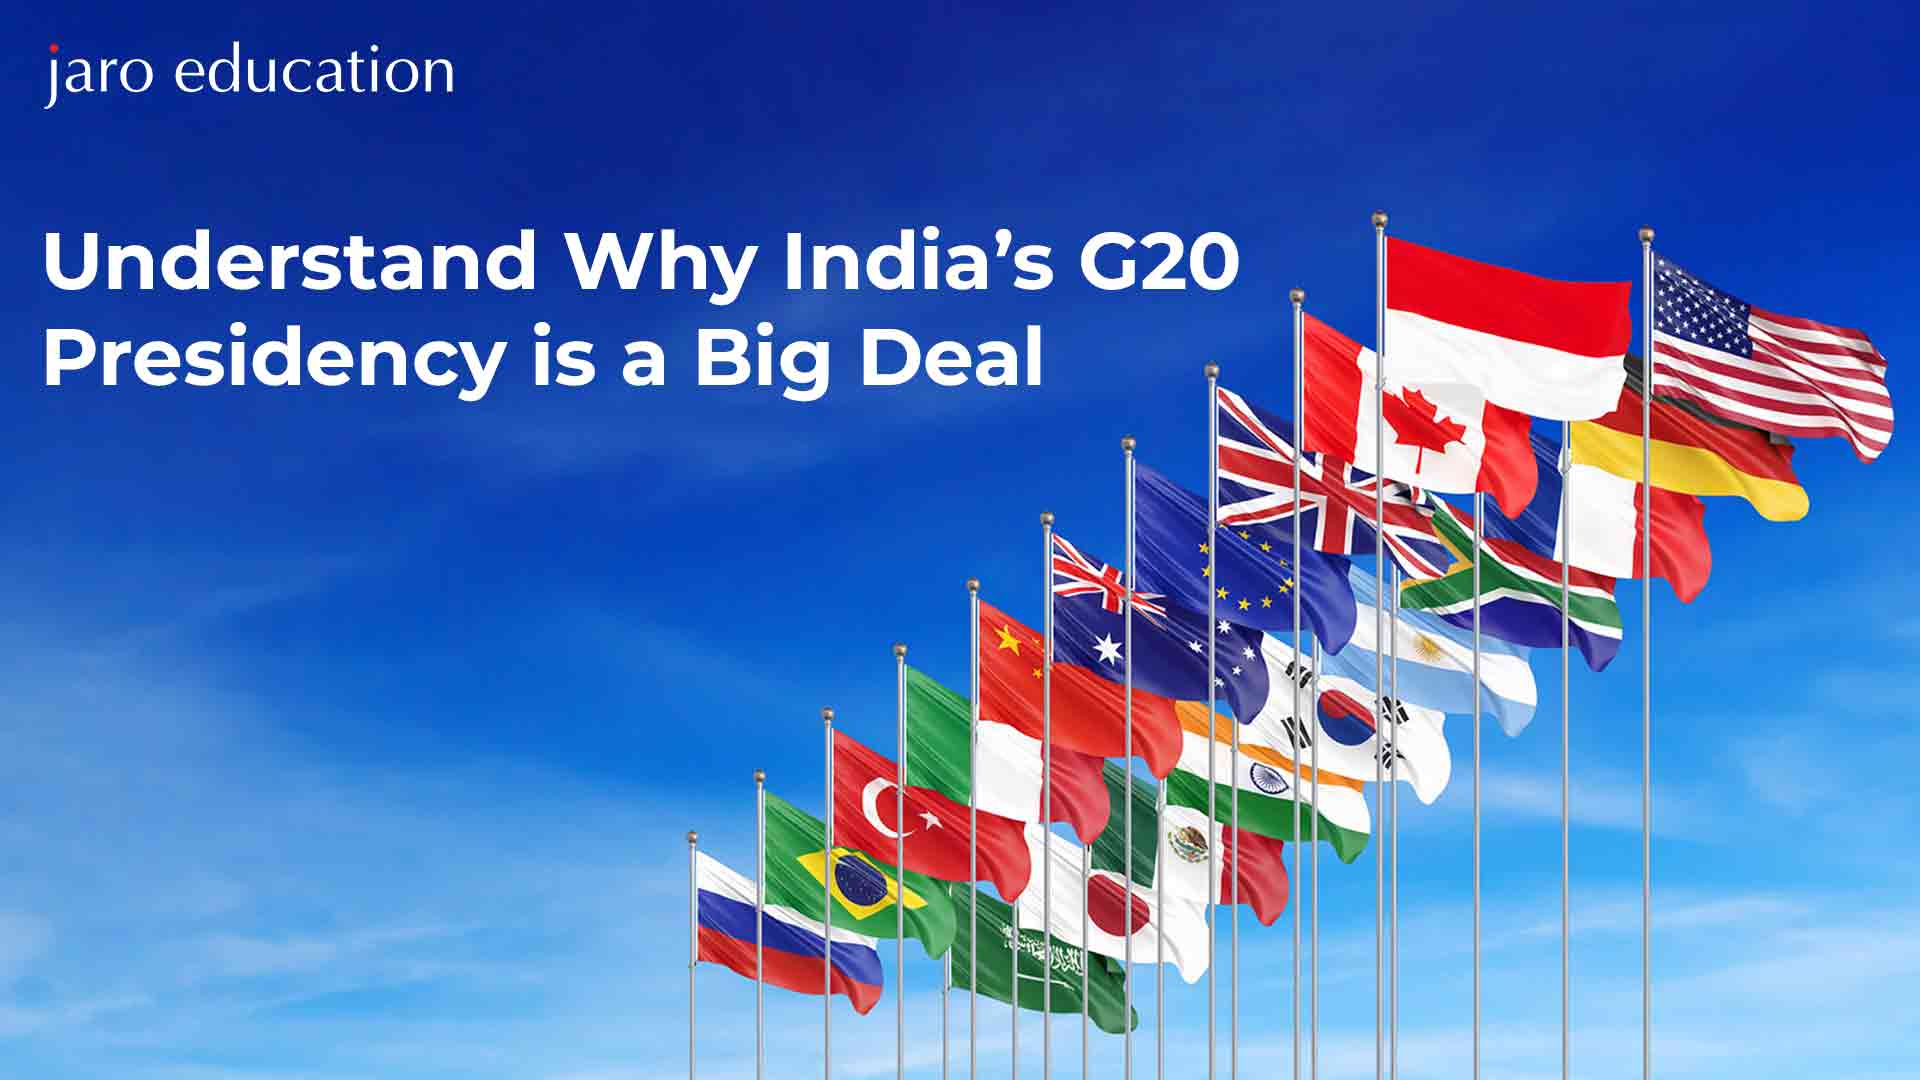 Understand Why India’s G20 Presidency is a Big Deal